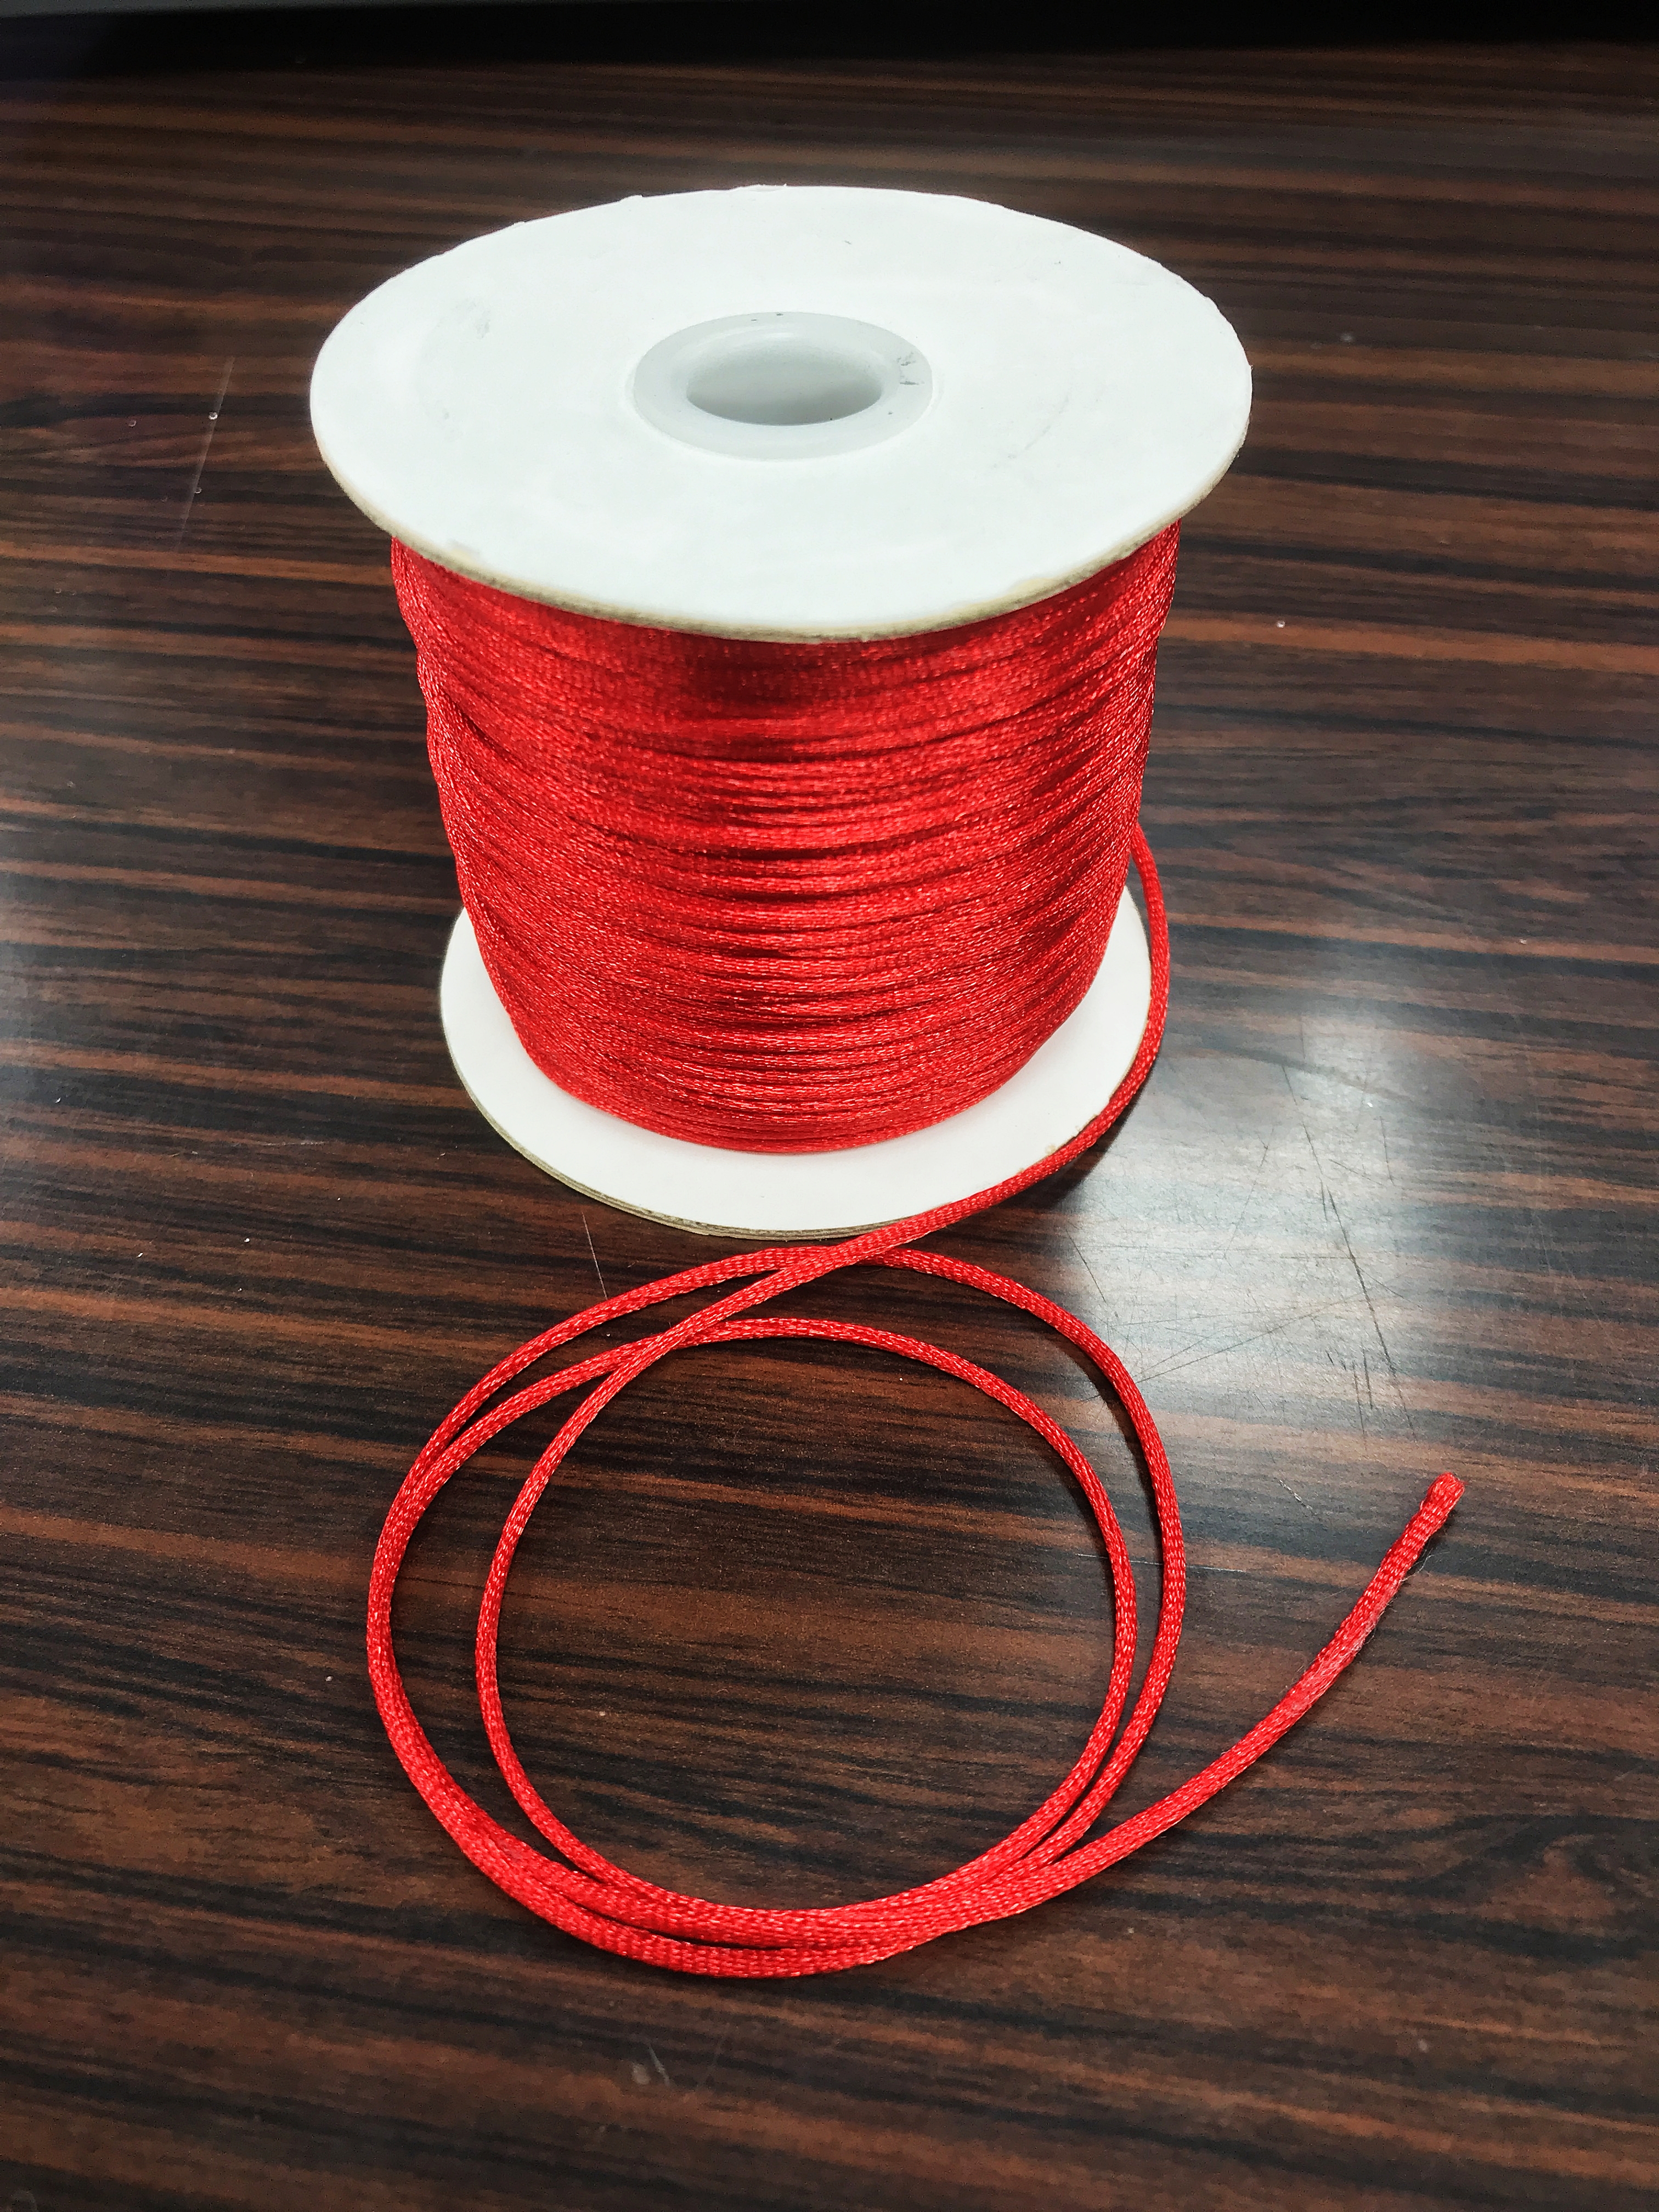 Plain Color China Knot Rattail Cord made in China